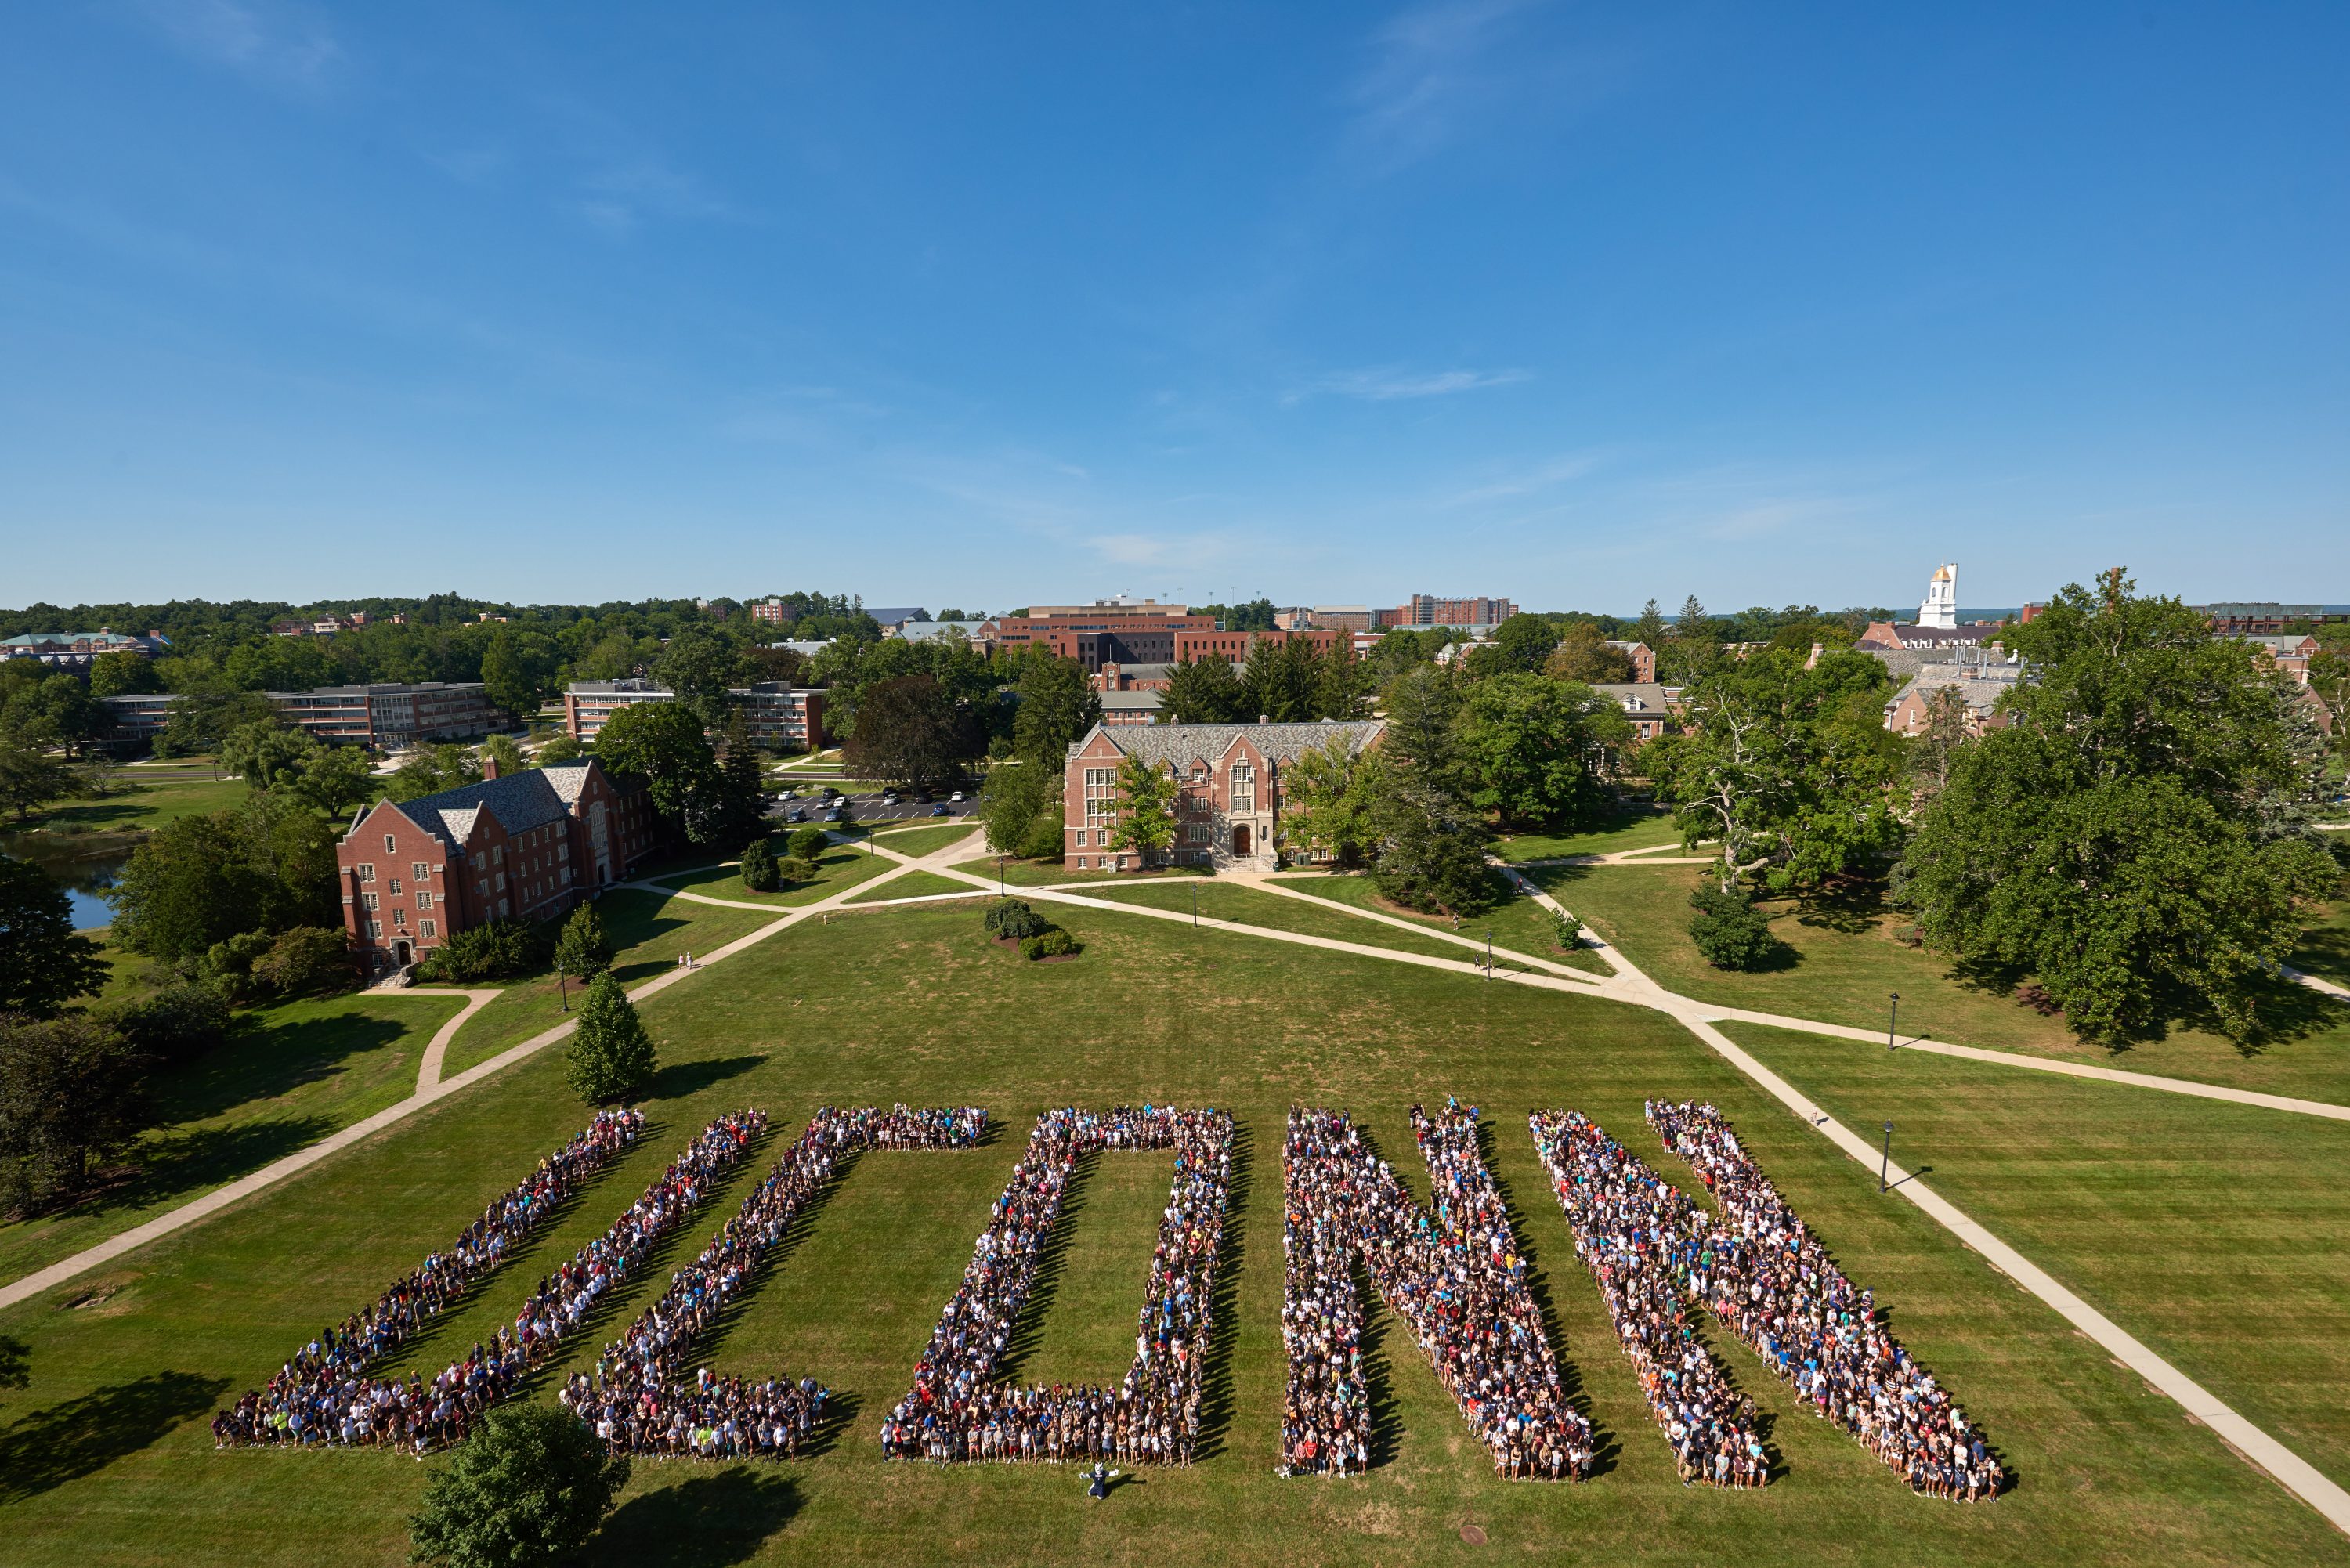 The Class of 2020 spells out UConn on the Great Lawn on Aug. 27, 2016. (Peter Morenus/UConn Photo)